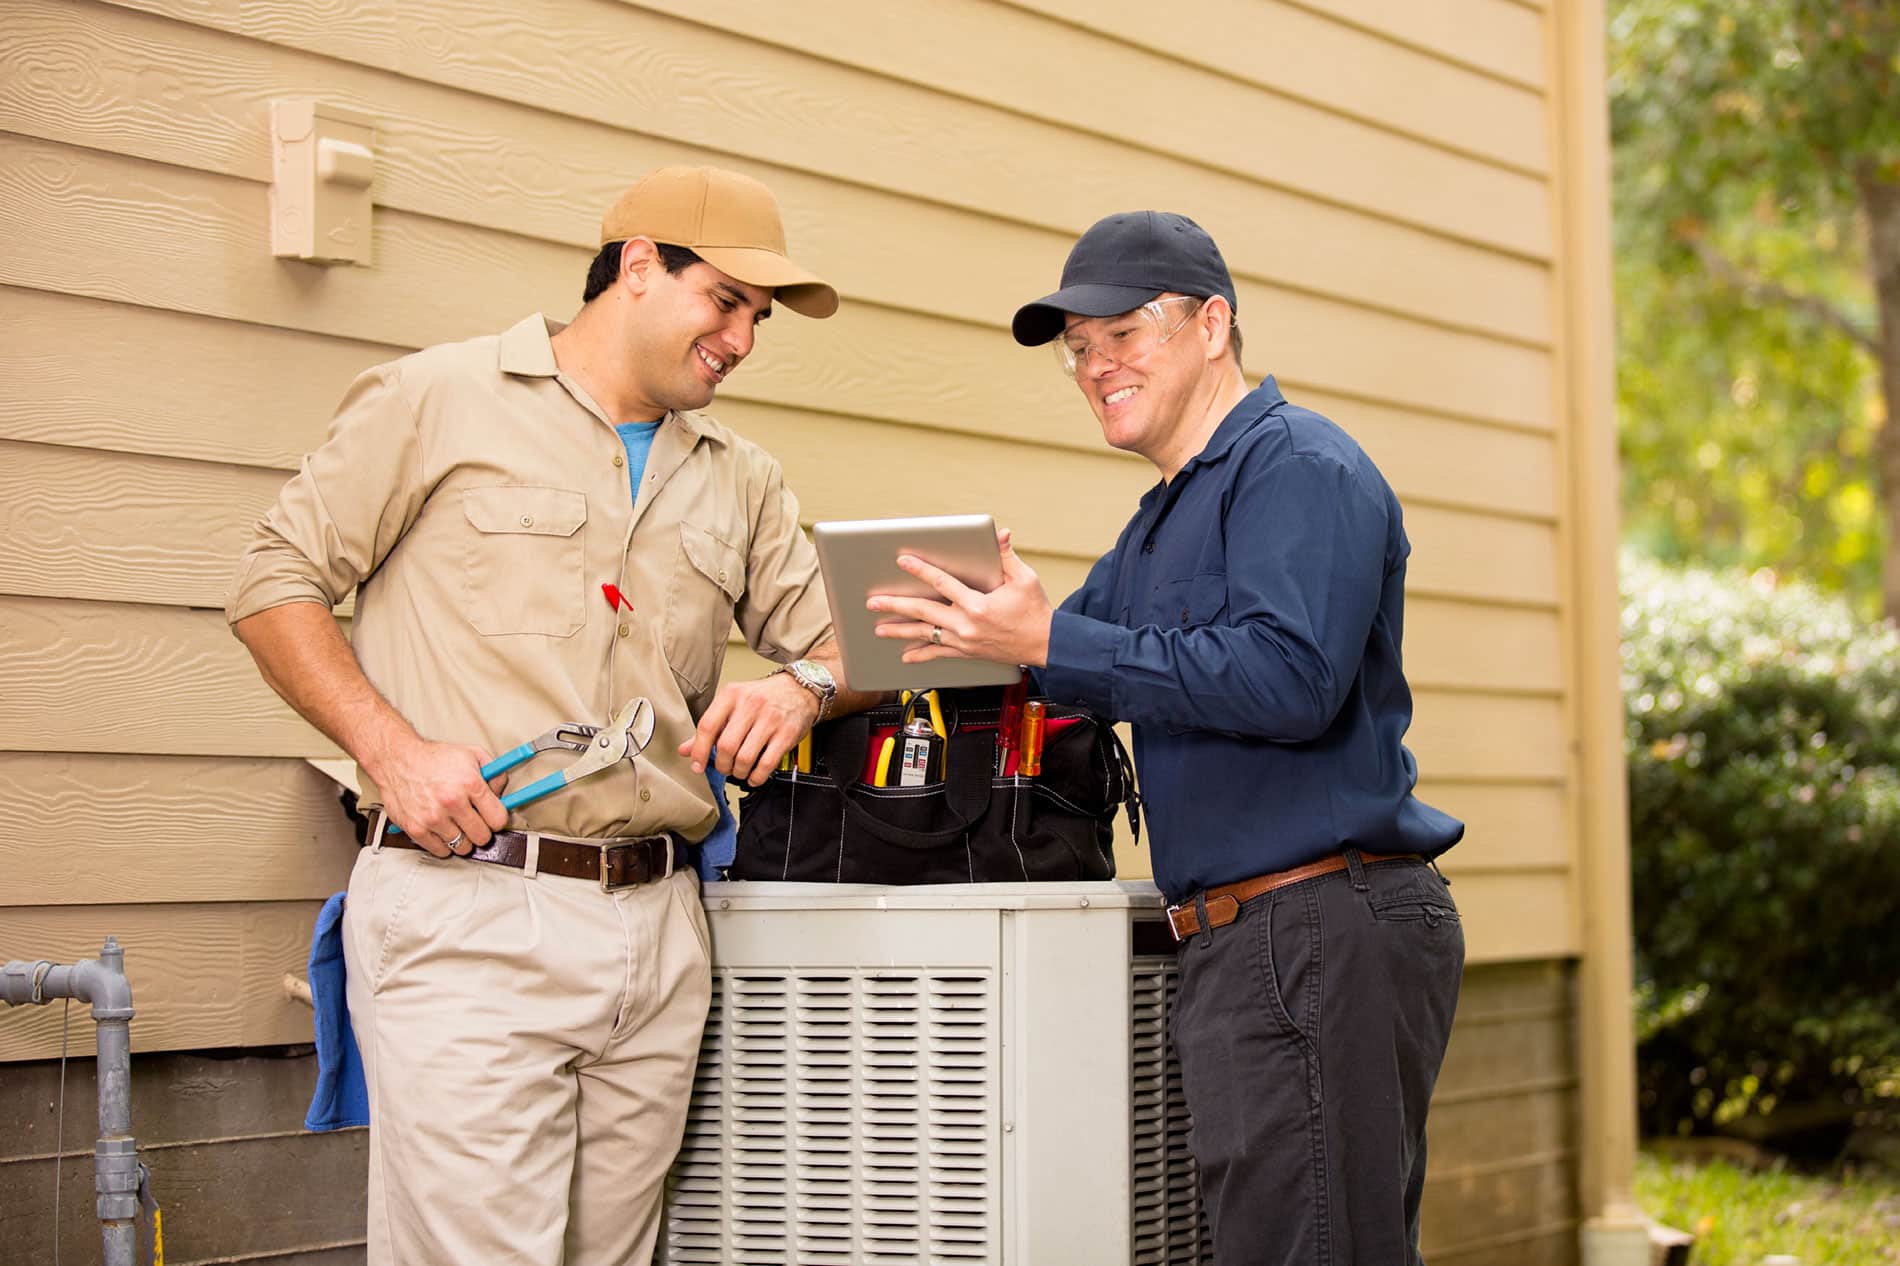 The Many Benefits of Preventive Maintenance